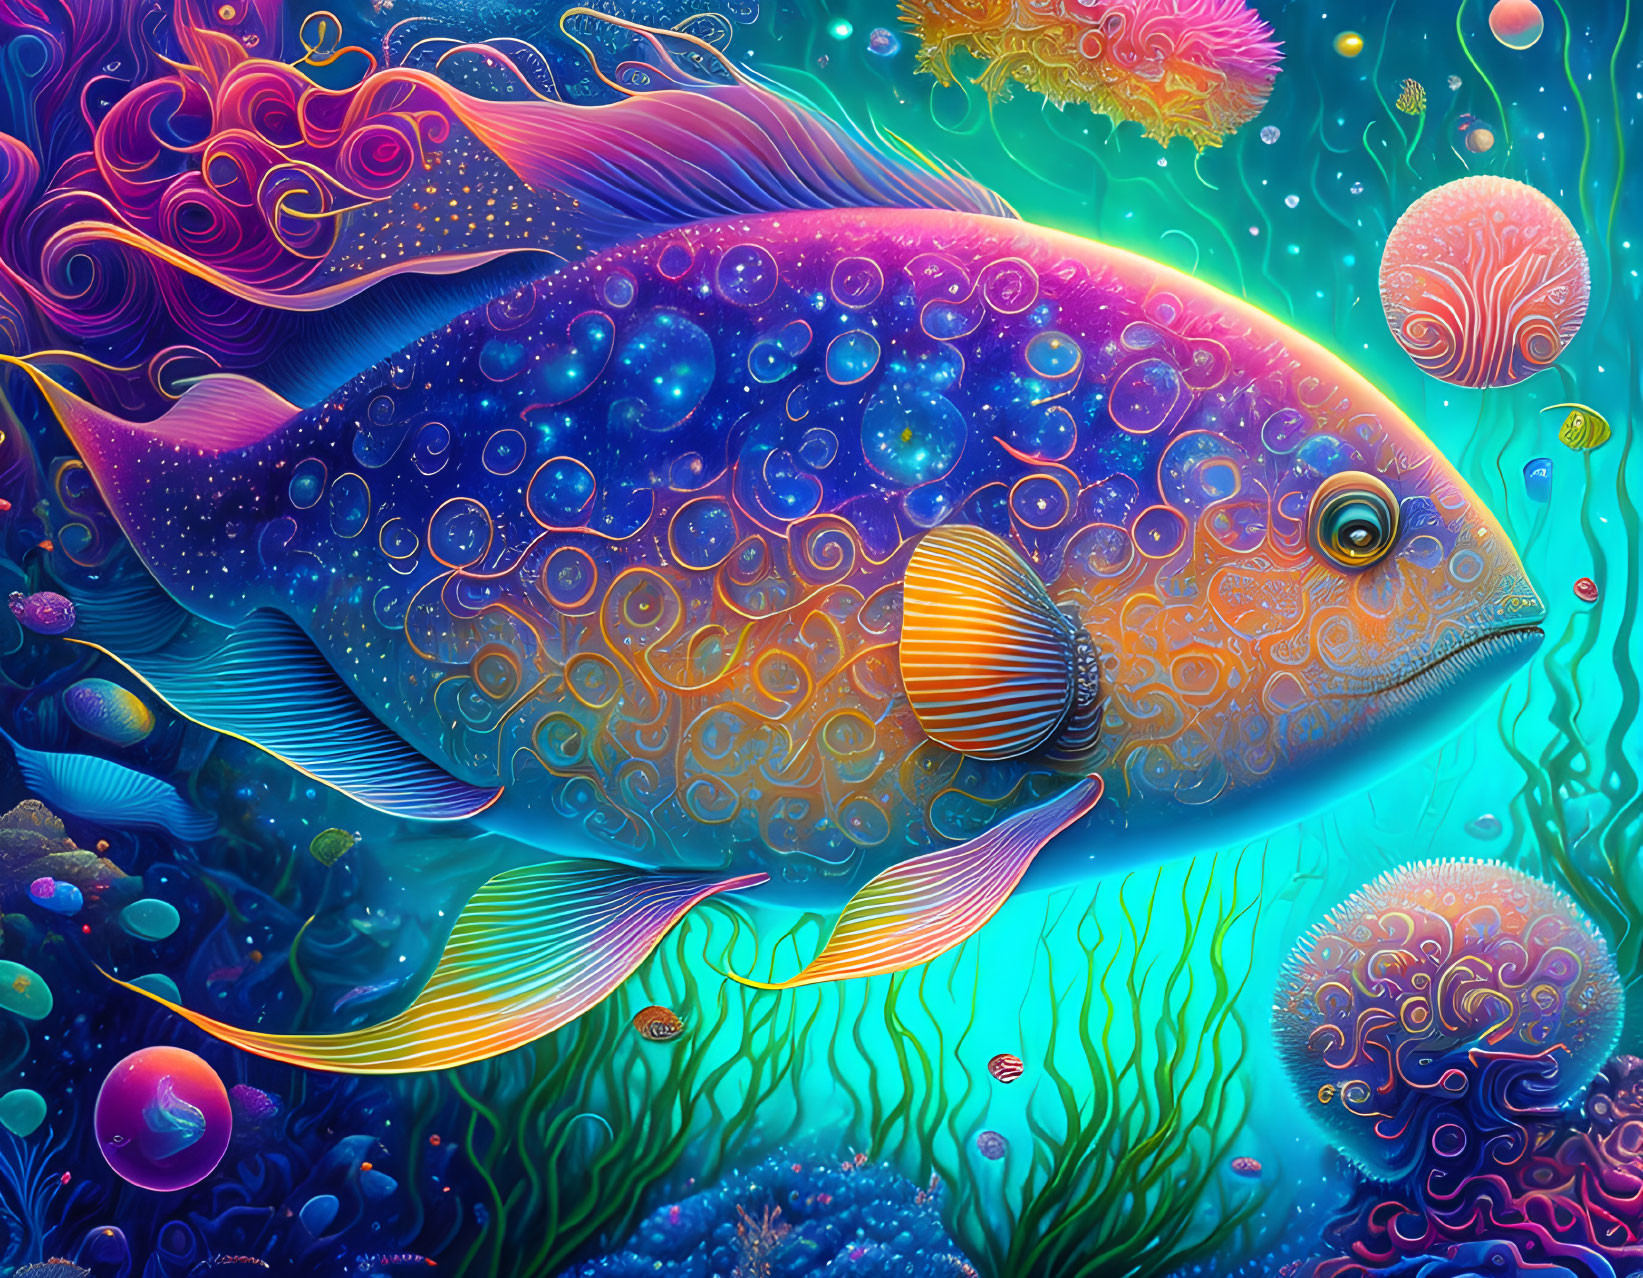 Colorful Psychedelic Fish Illustration with Coral and Jellyfish